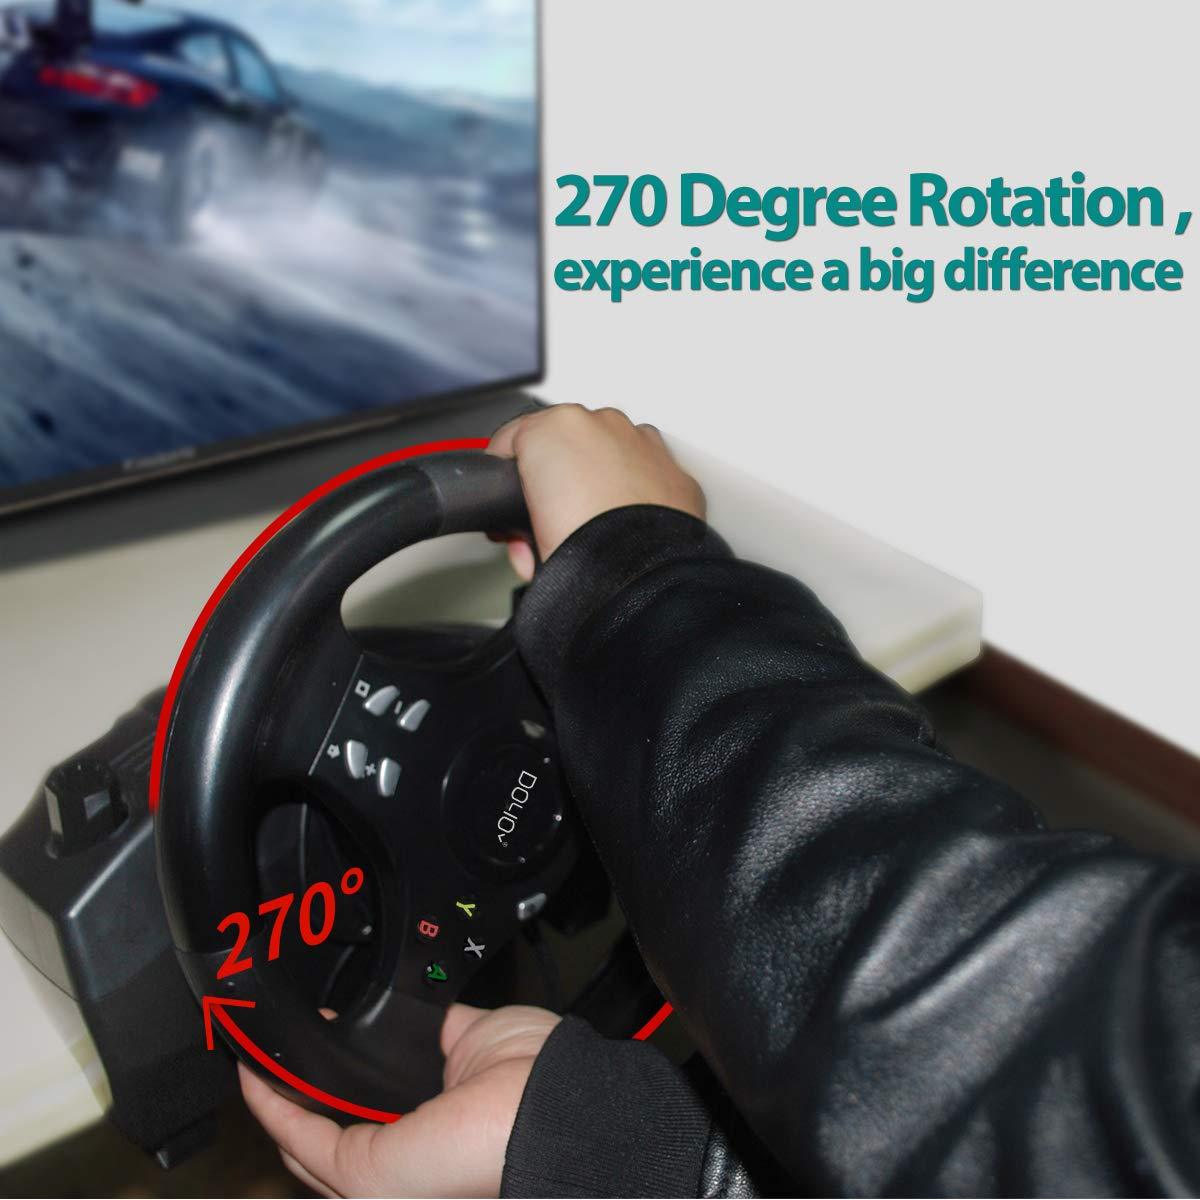 Logitech G29 Driving Force Racing Wheel And Pedal For PS3 / PS4 & PC Pl